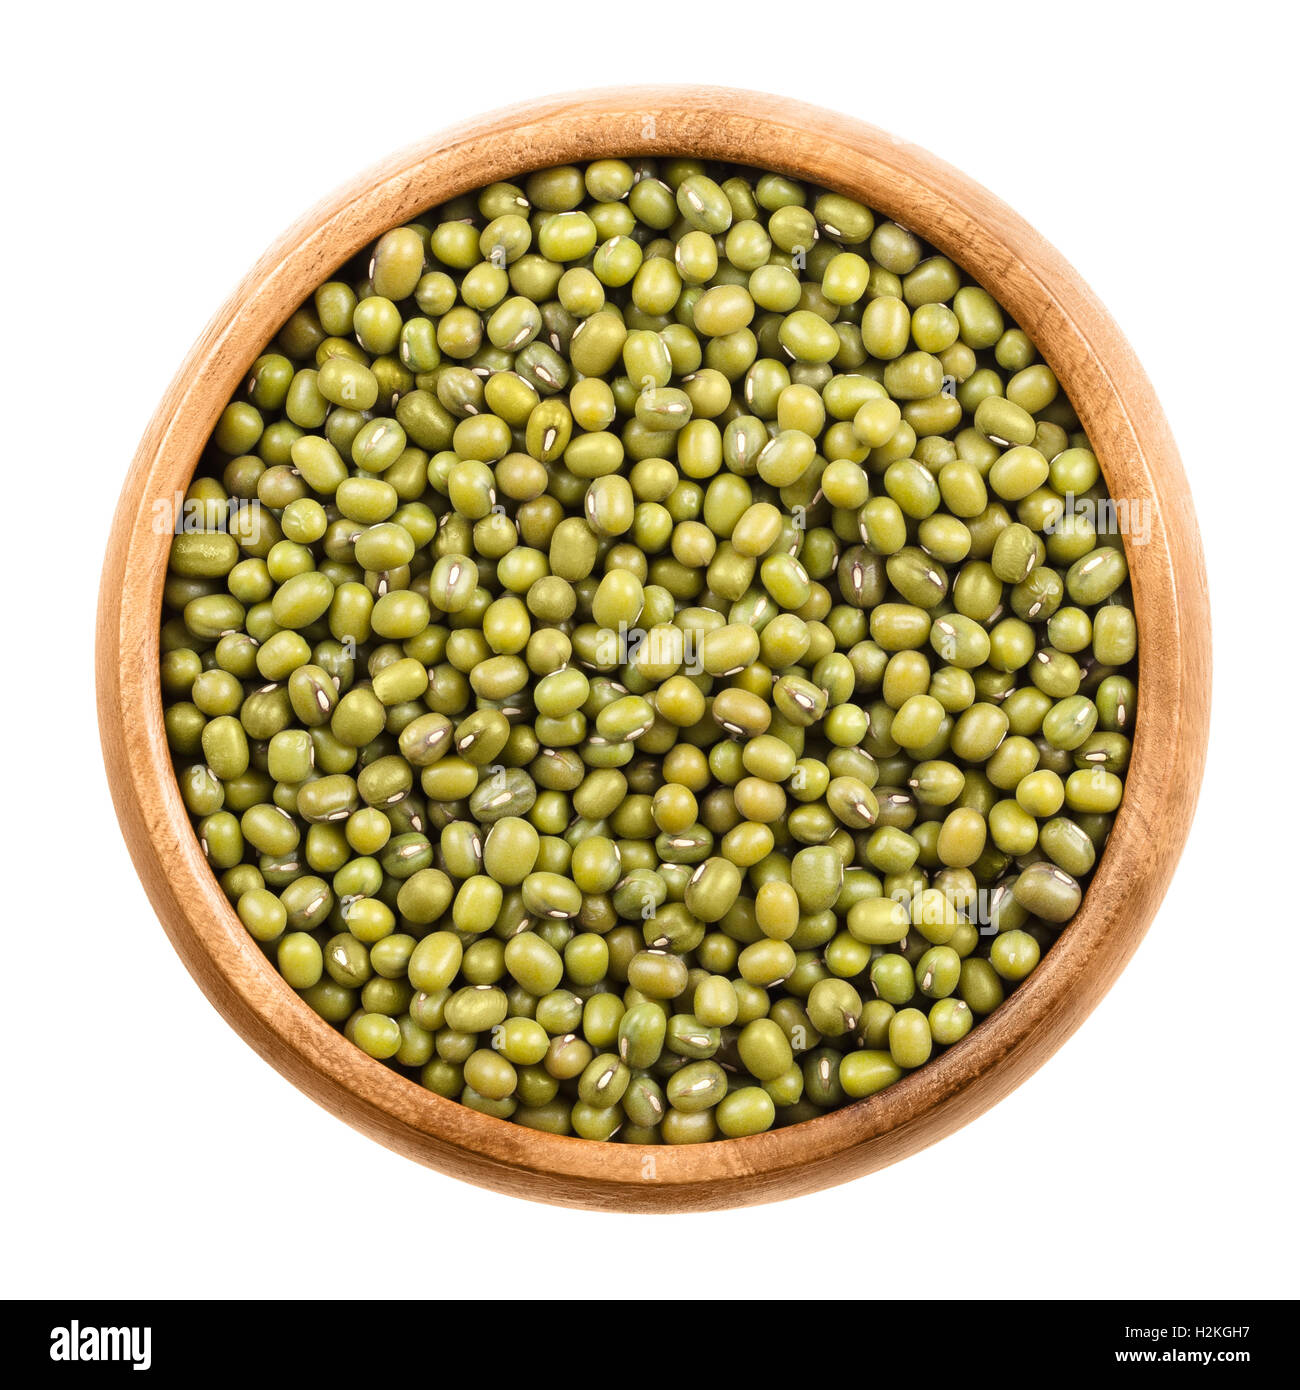 Mung beans in a wooden bowl on white background. Dried beans of Vigna radiata, also moong bean, green gram or mung, a legume. Stock Photo